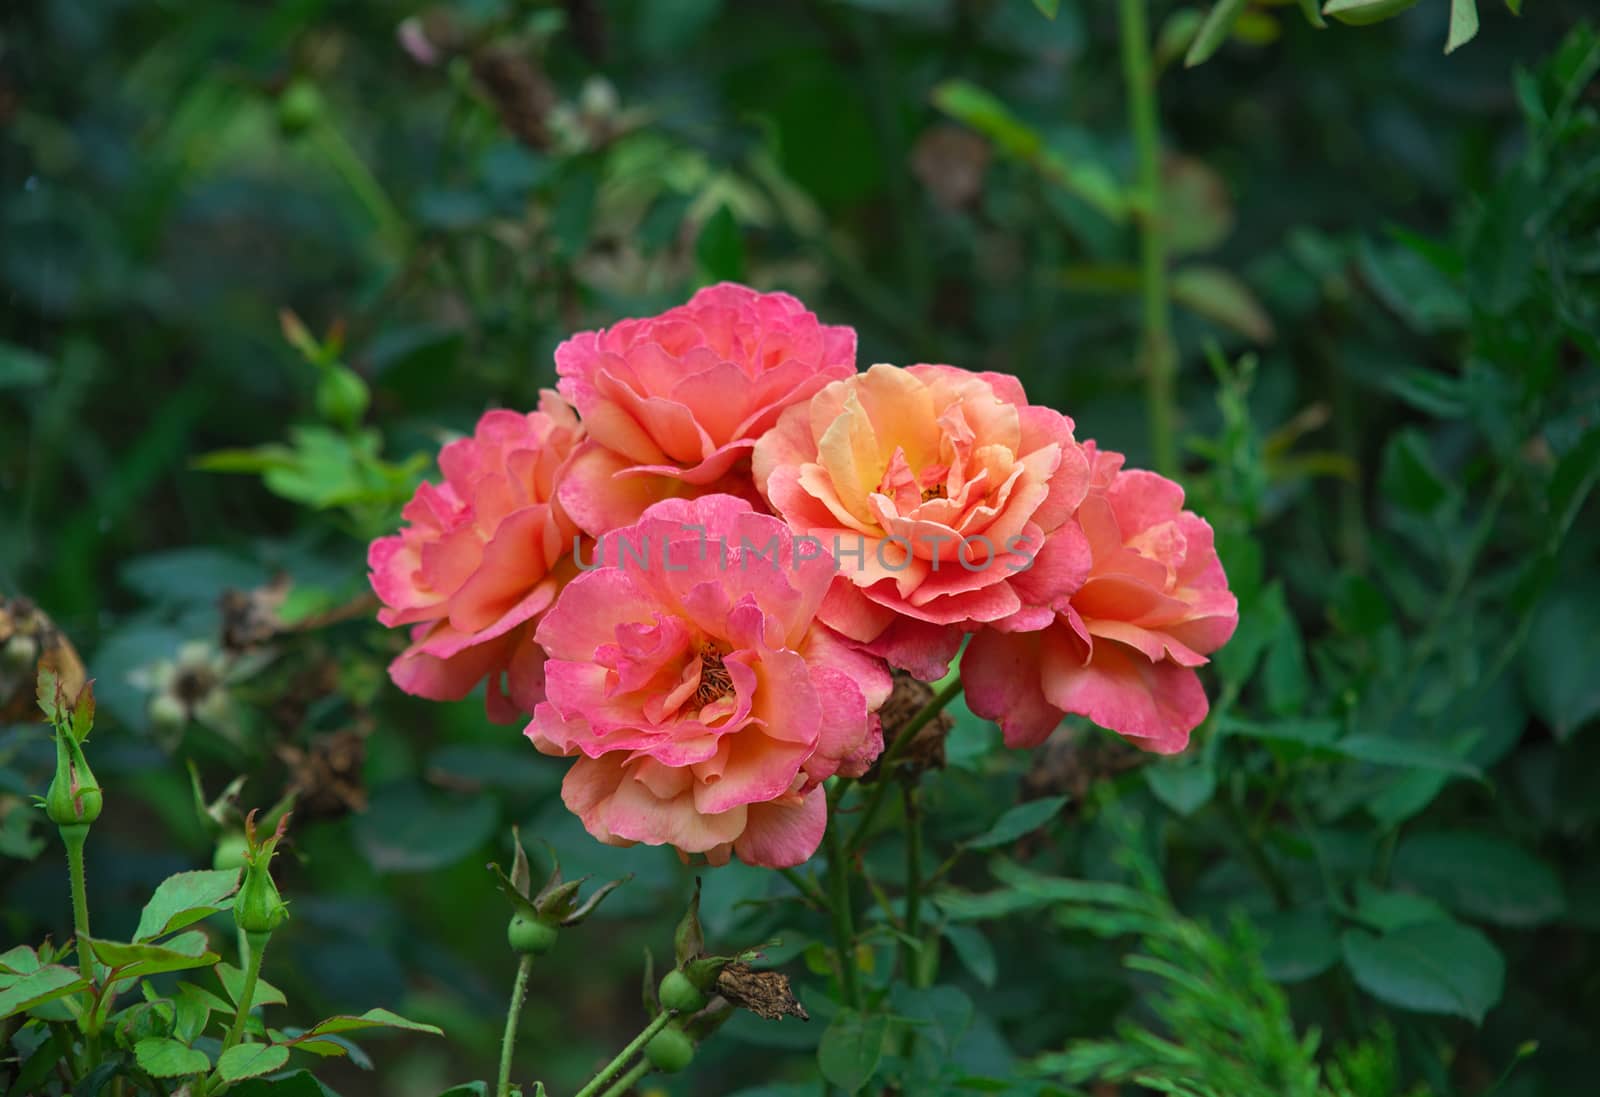 Several orange roses blossoming in green garden by sheriffkule